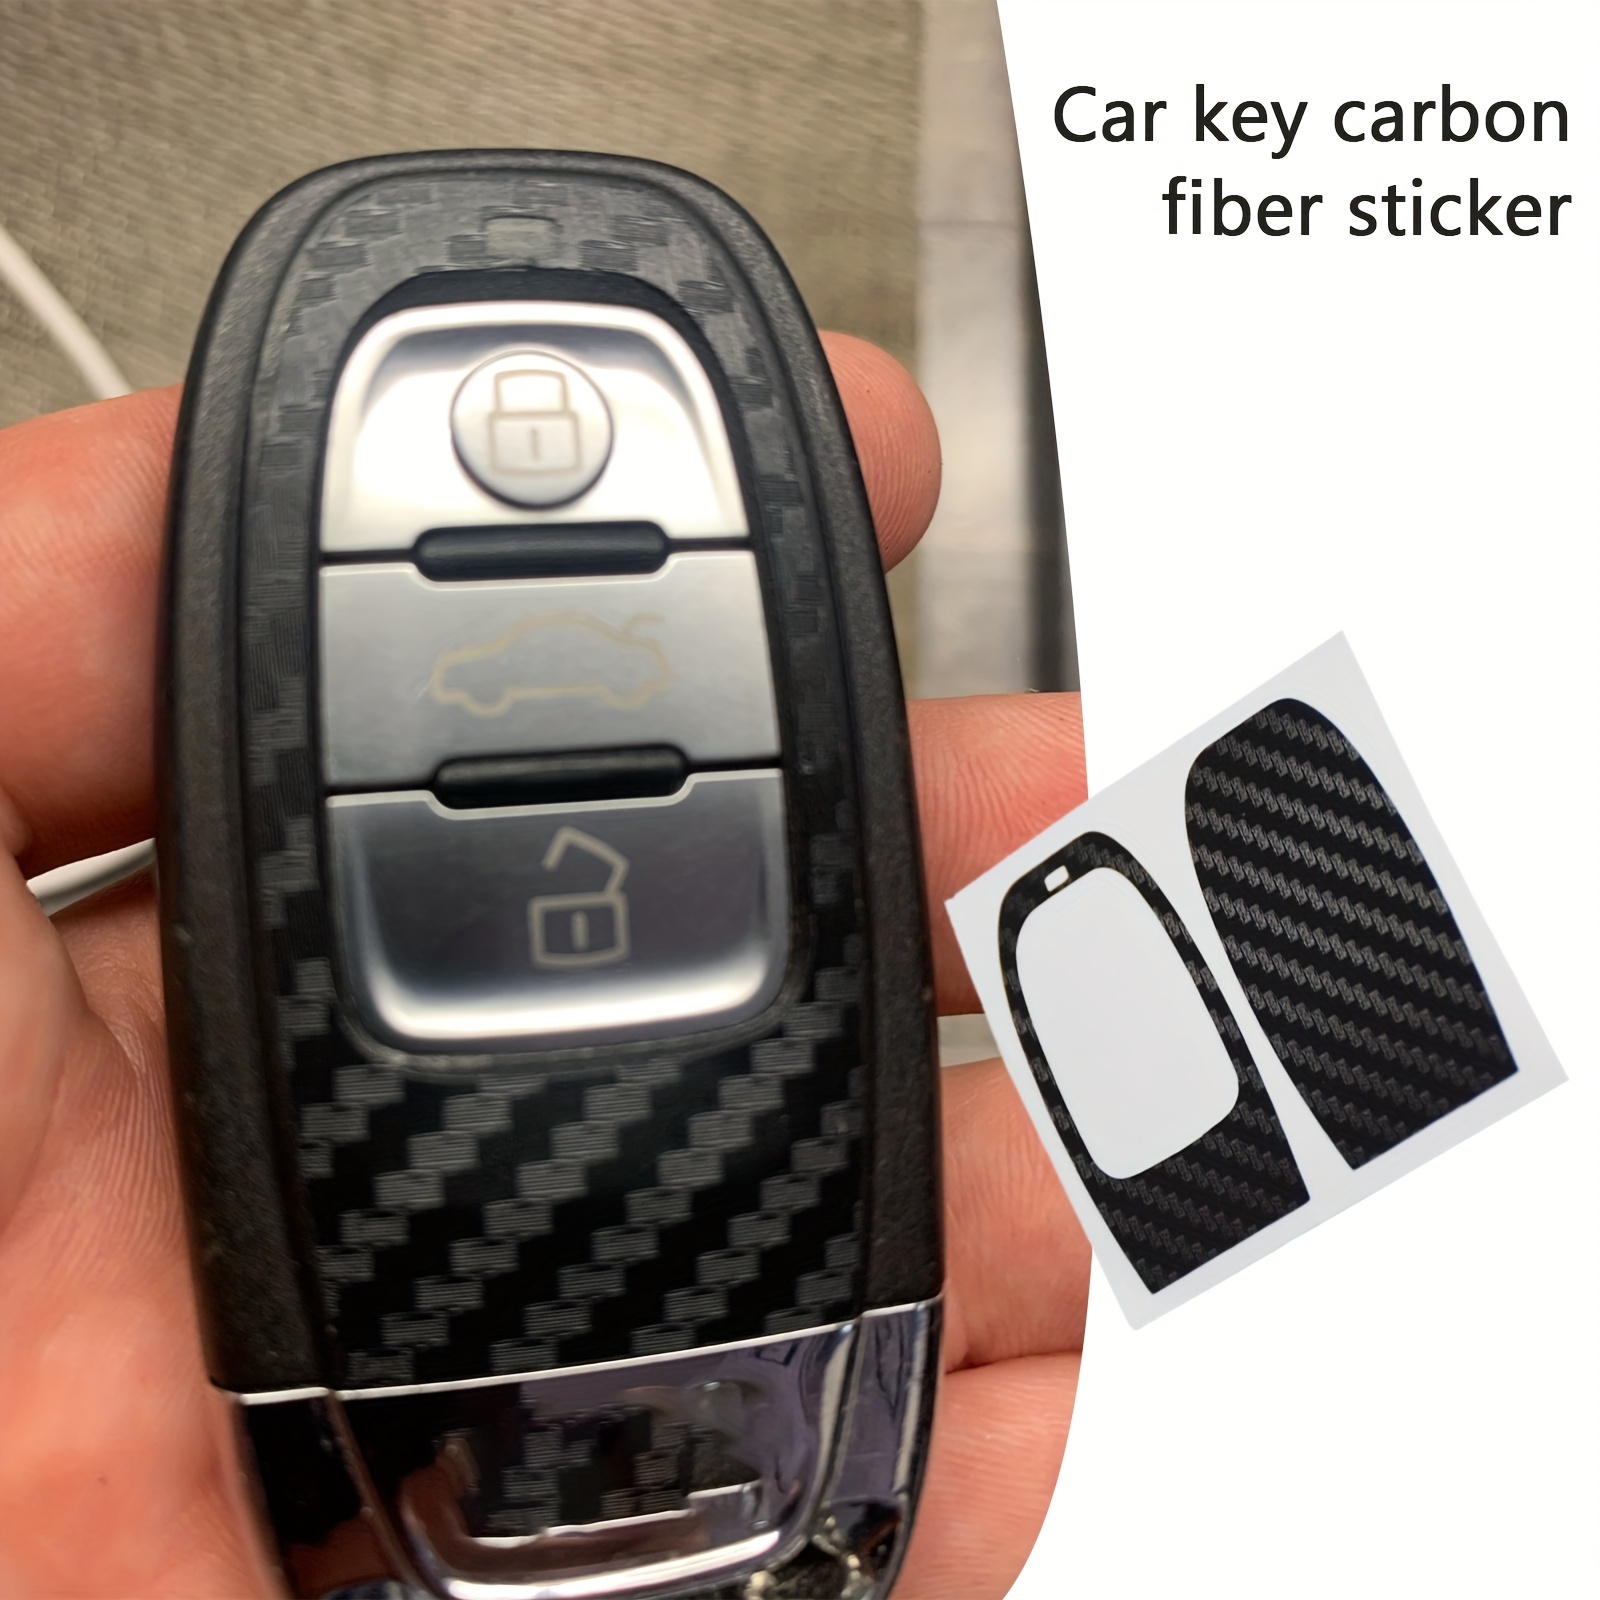 For Audi A3 A4 A5 A6 A7 A8 Real Red Carbon Fiber Remote Key Shell Cover  Case